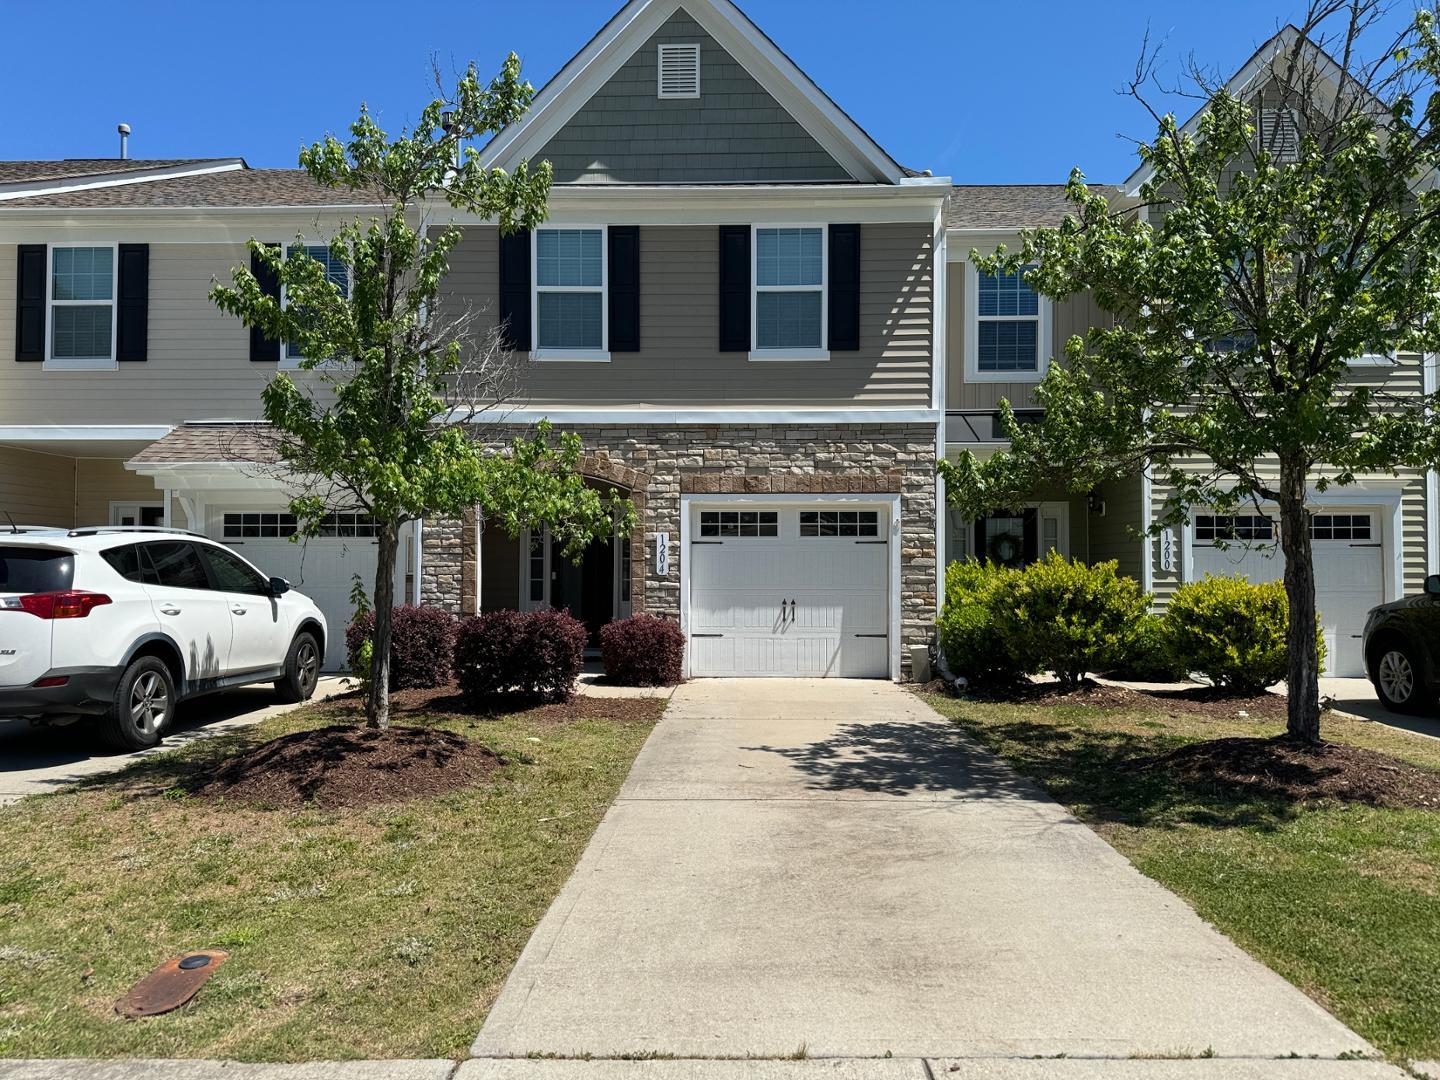 View Morrisville, NC 27560 townhome